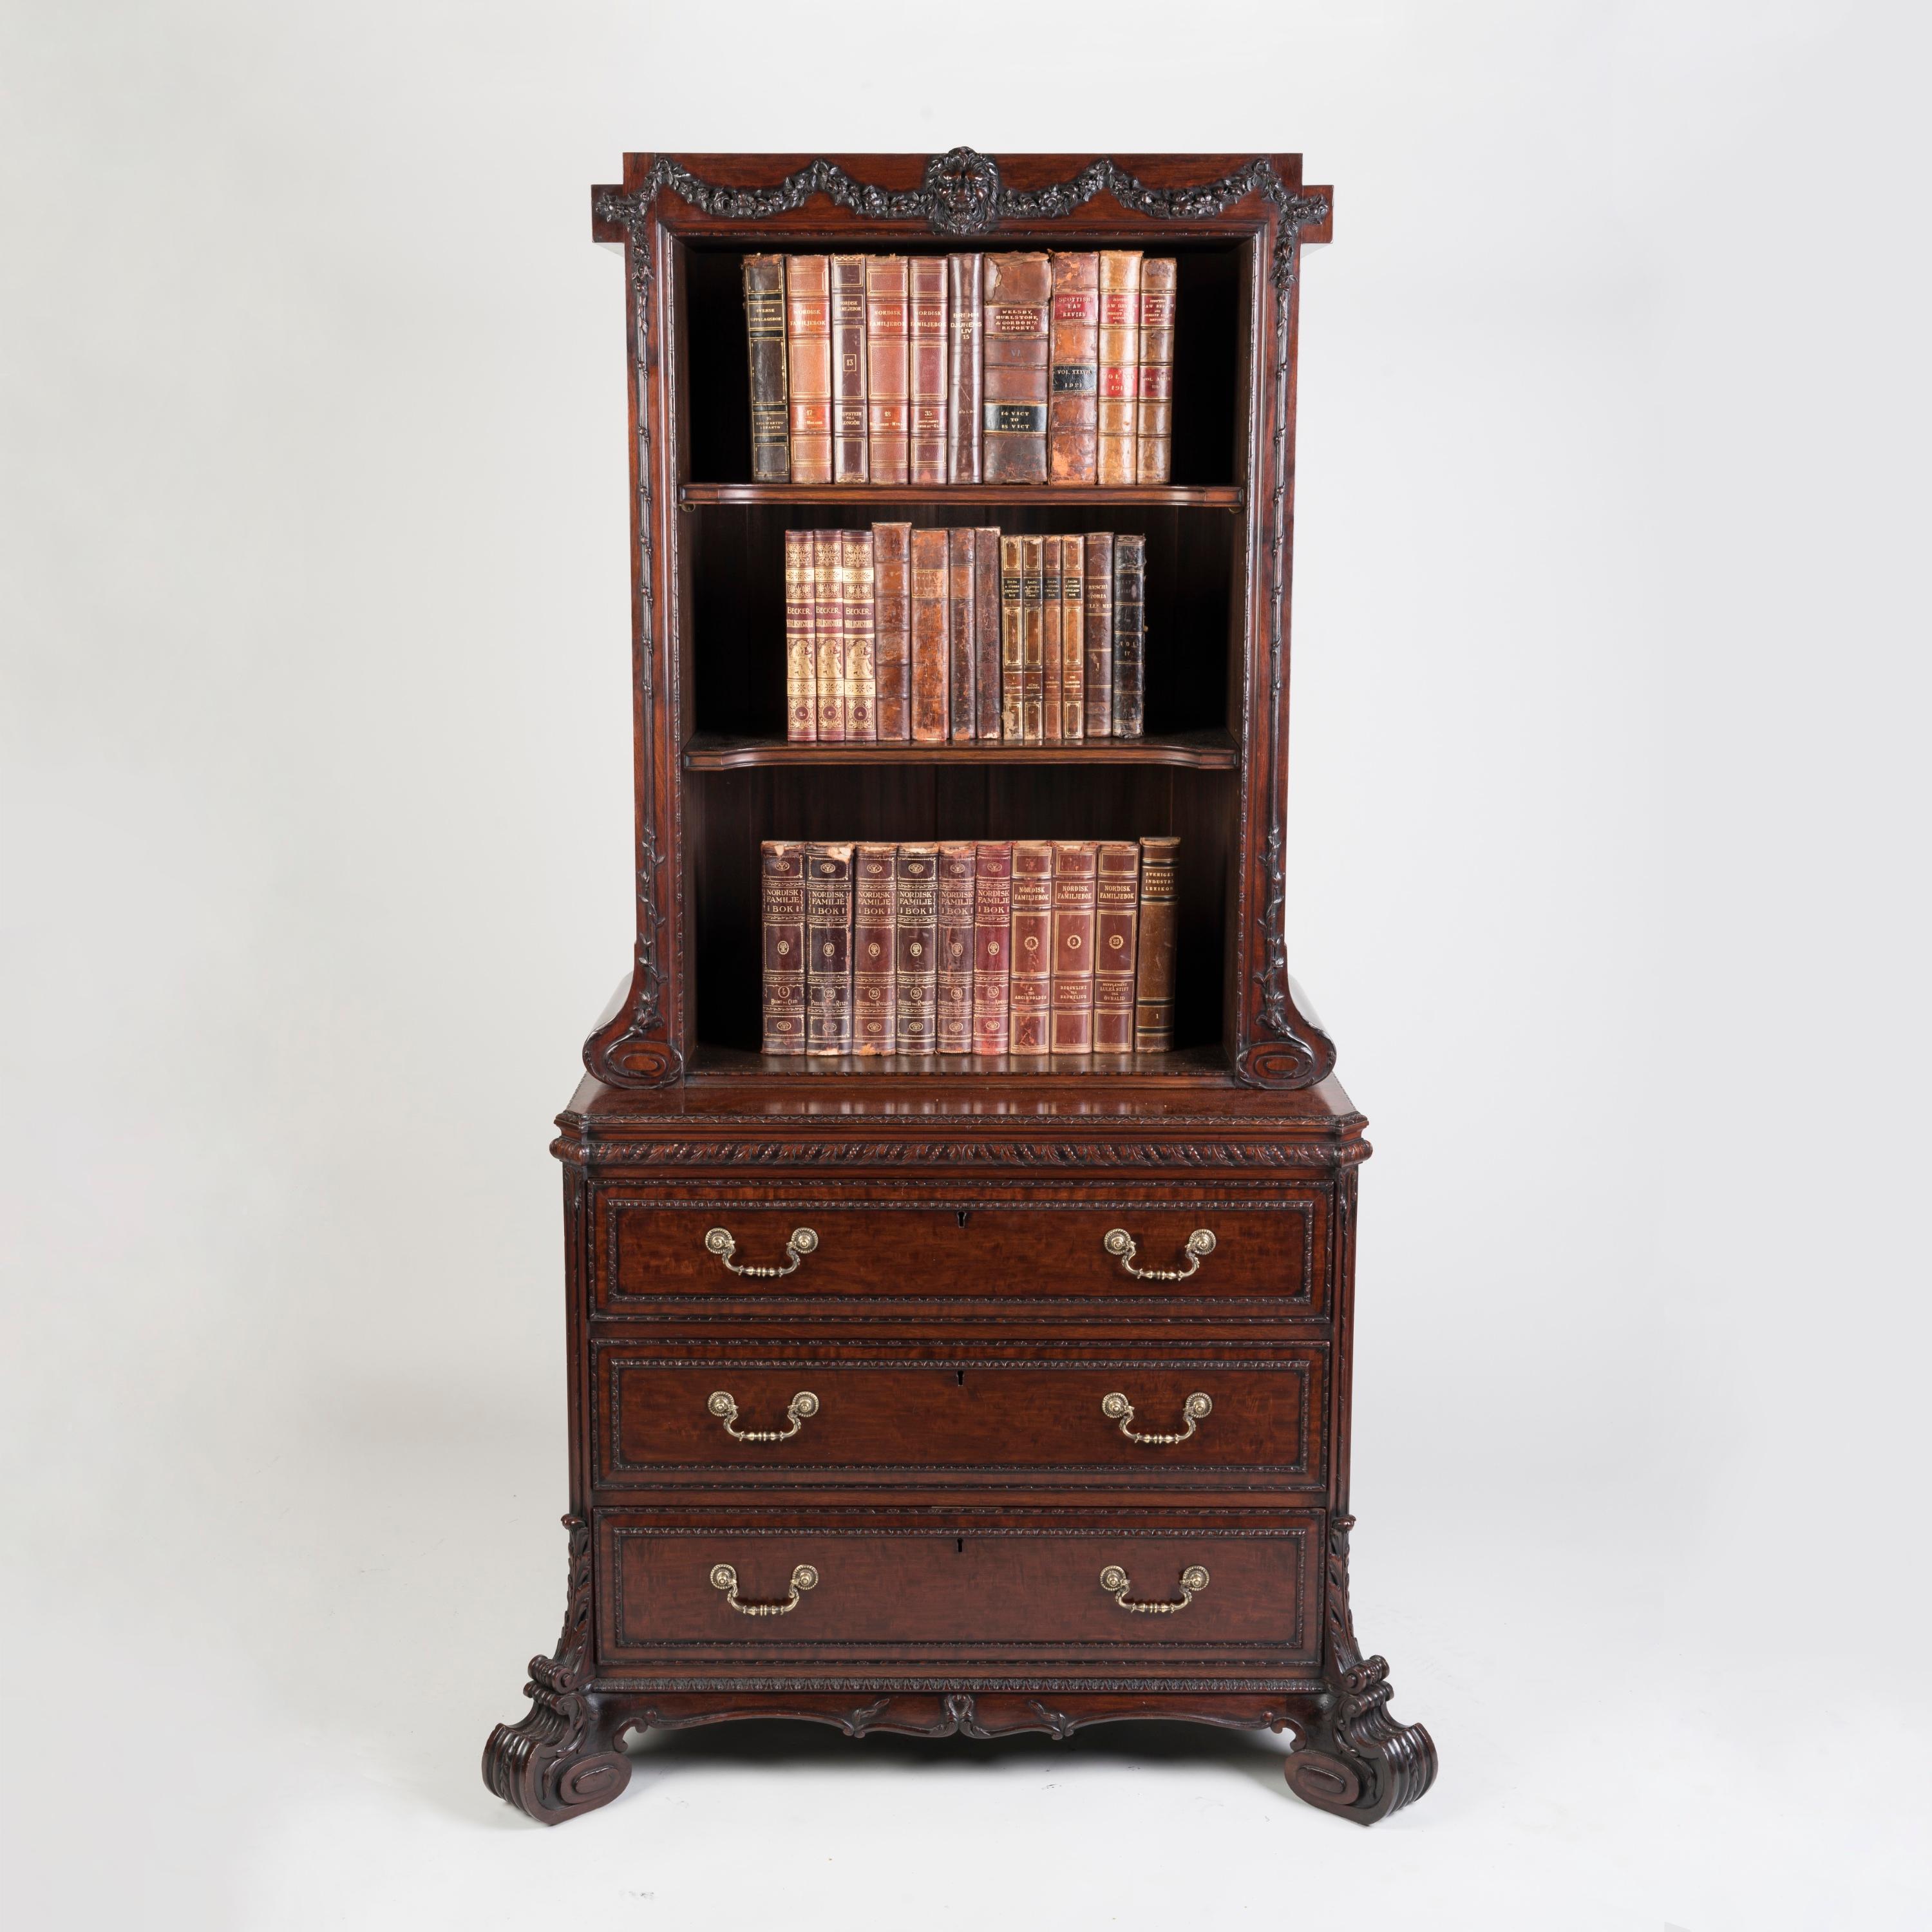 A Carved Mahogany Cabinet Bookcase in the George II Manner

by H. Samuel of London

Designed in the neo-classical fashion pioneered by Thomas Chippendale, the mahogany cabinet bookcase is crisply carved throughout, rising from voluminous scrolling